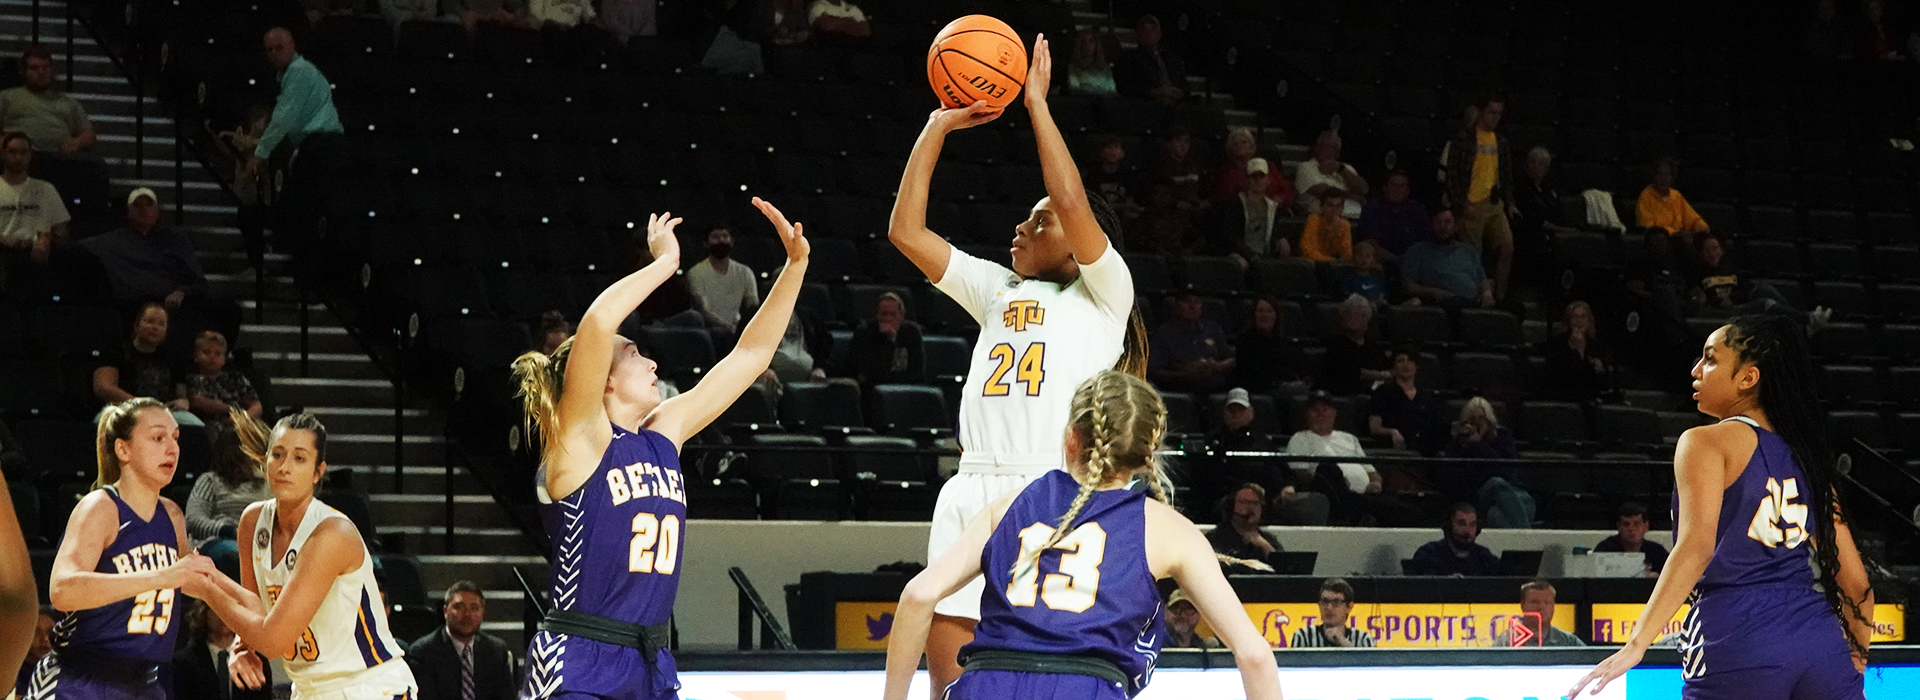 Tech women welcome Chattanooga in Homecoming battle